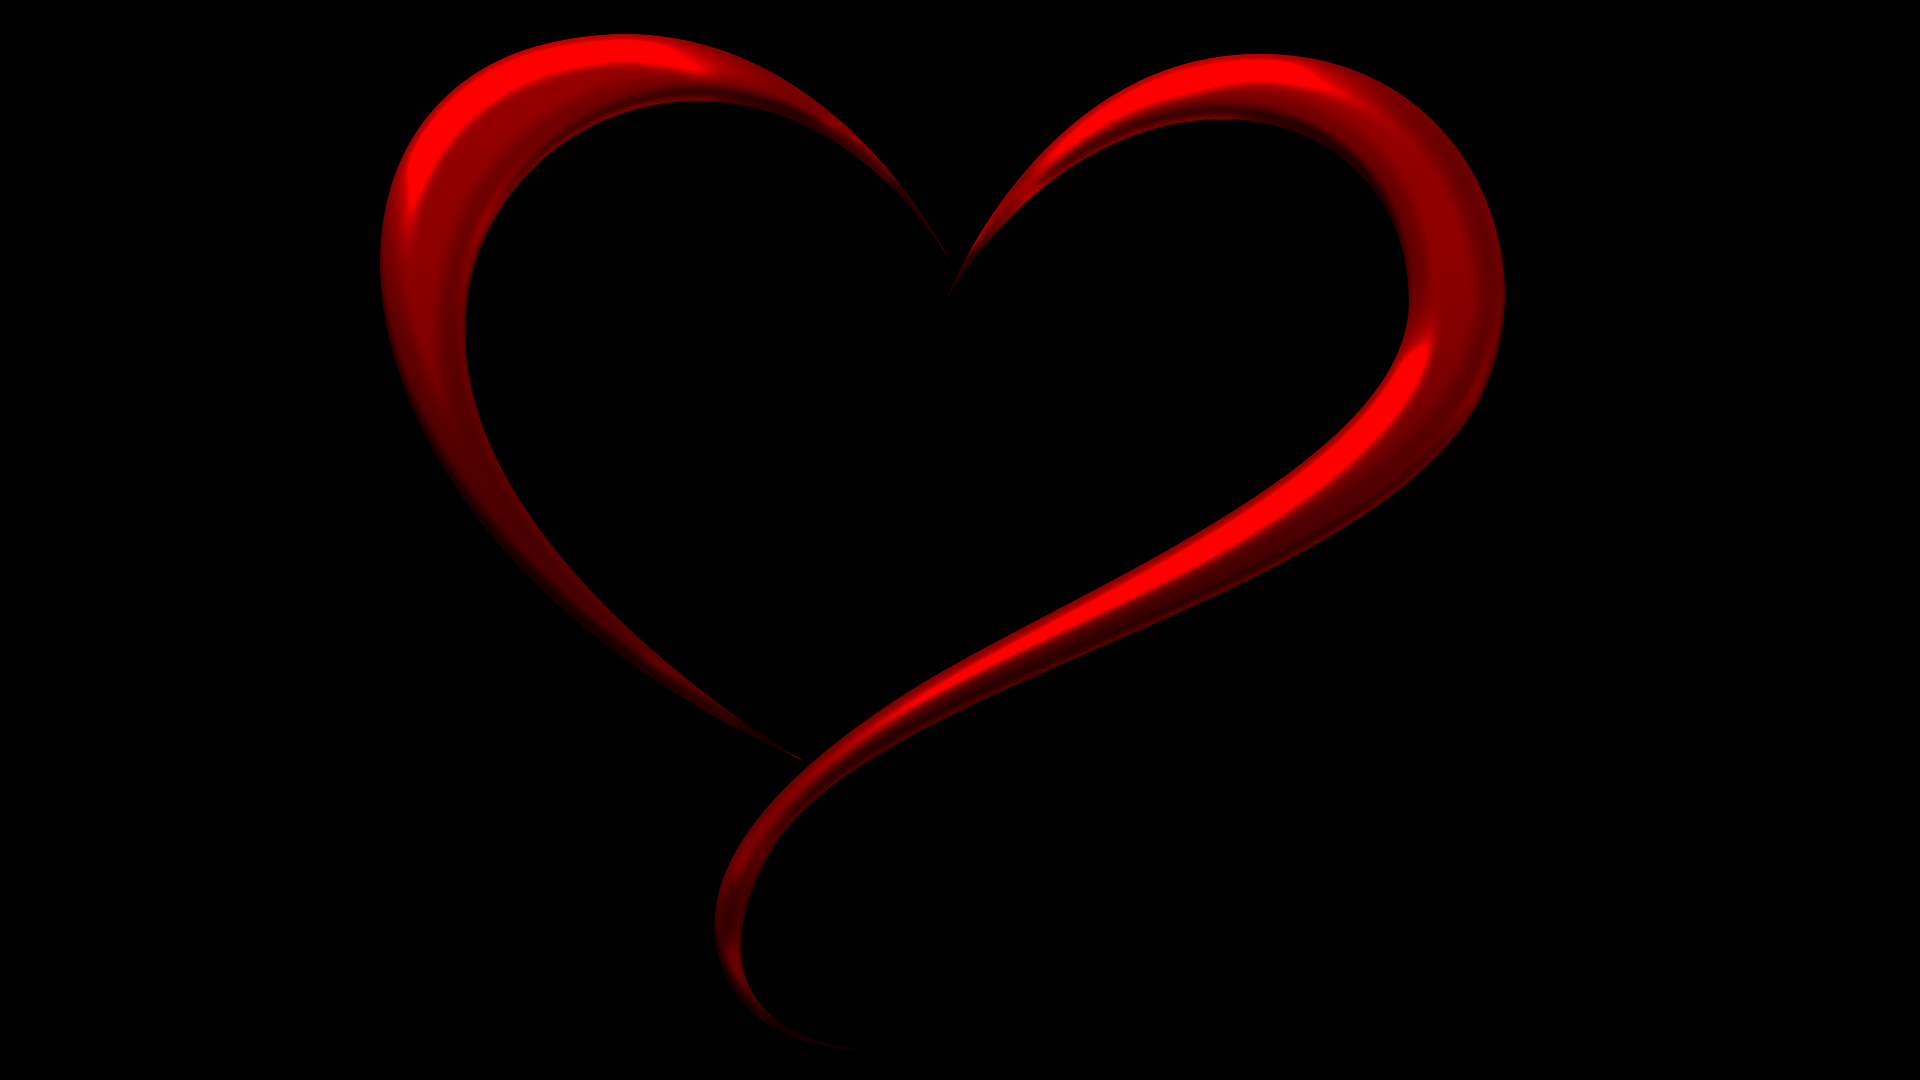 1920x1080 All Black Red Heart Wallpapers